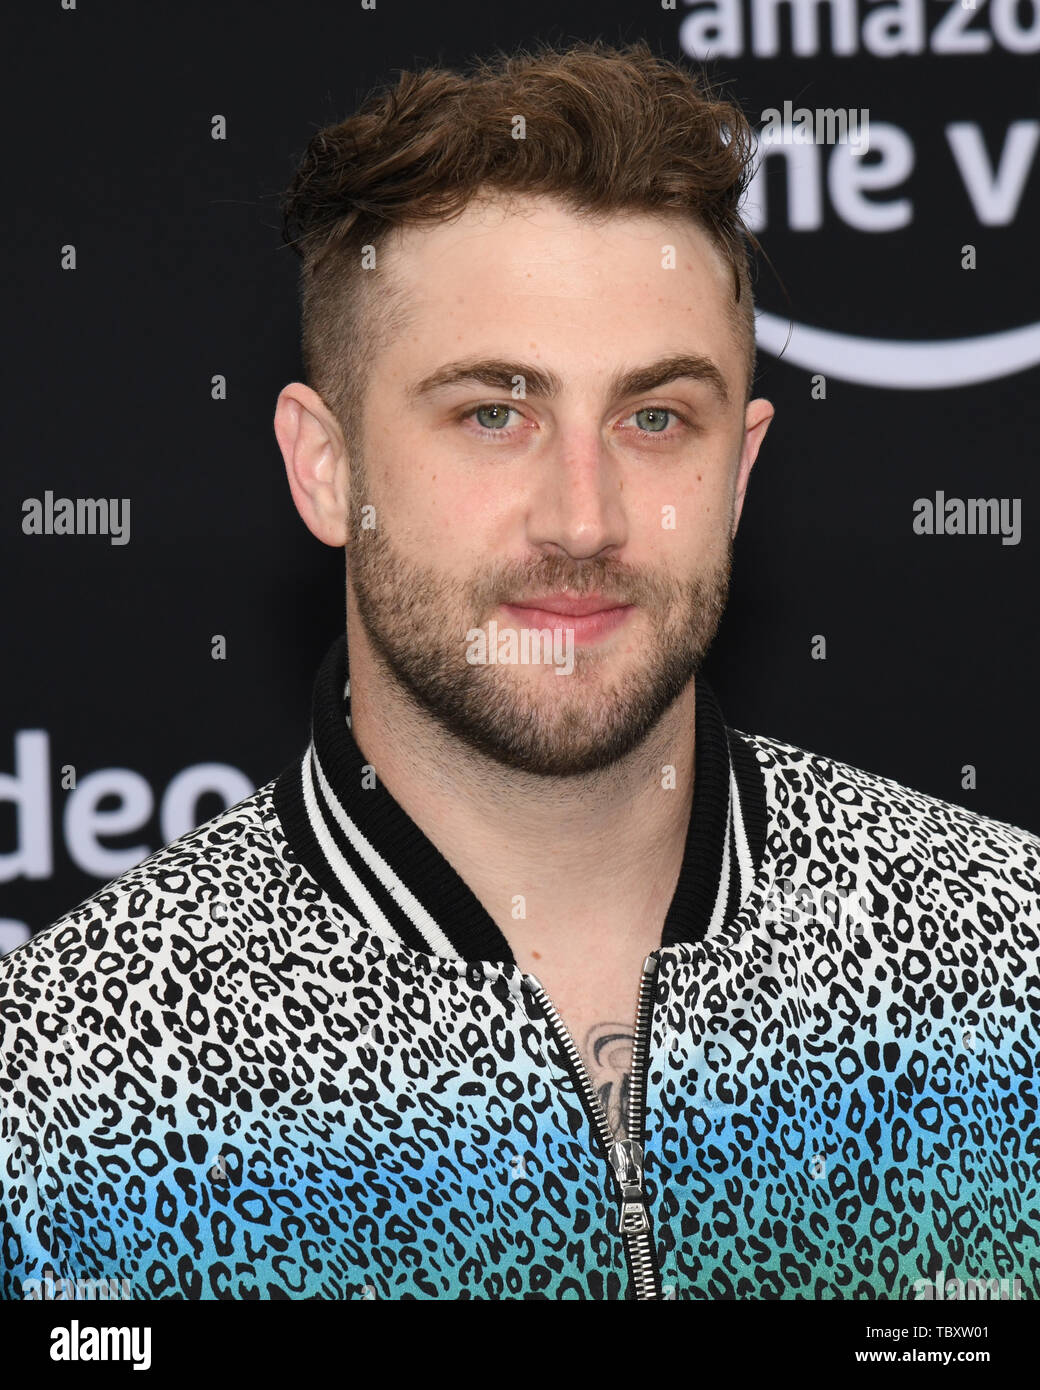 June 3, 2019 - Westwood, California, USA - 02, June 2019 - Westwood Village, California. Jordan McGraw attends Premiere Of Amazon Prime Video's 'Chasing Happiness' at the Regency Village Bruin Theatre. (Credit Image: © Billy Bennight/ZUMA Wire) Stock Photo